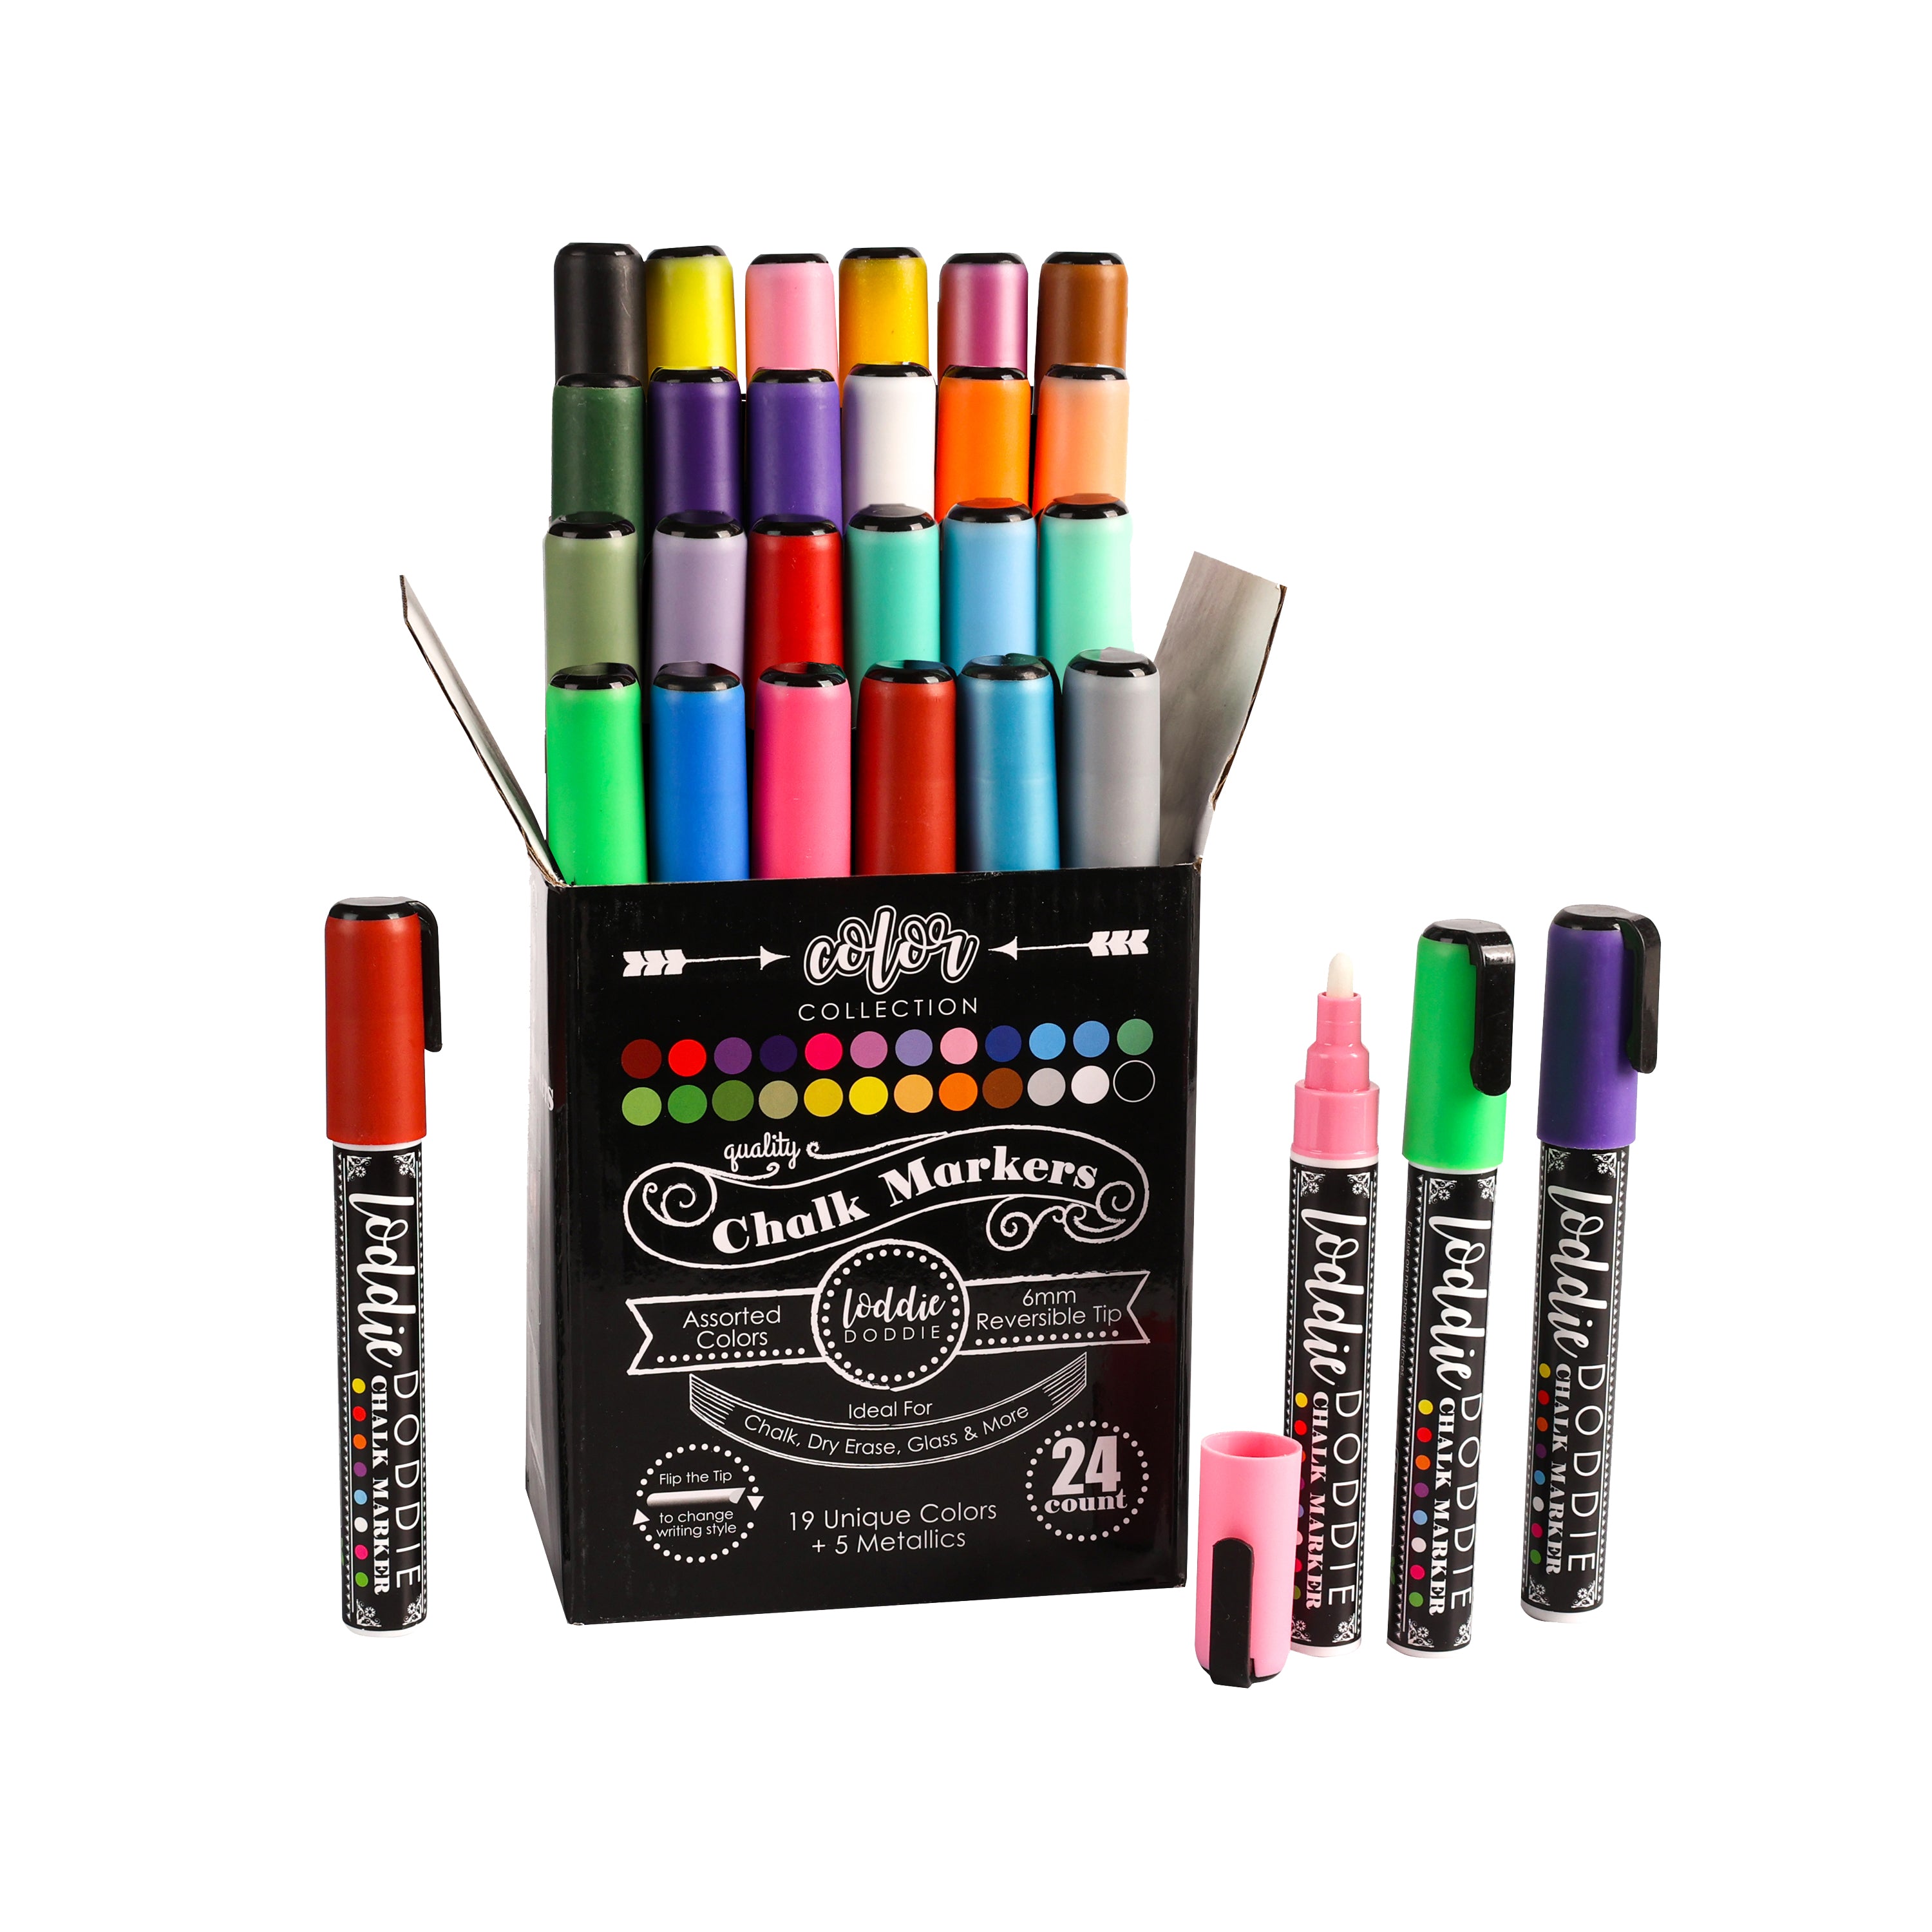 A Pack of 6 Liquid Chalk Markers for Kids